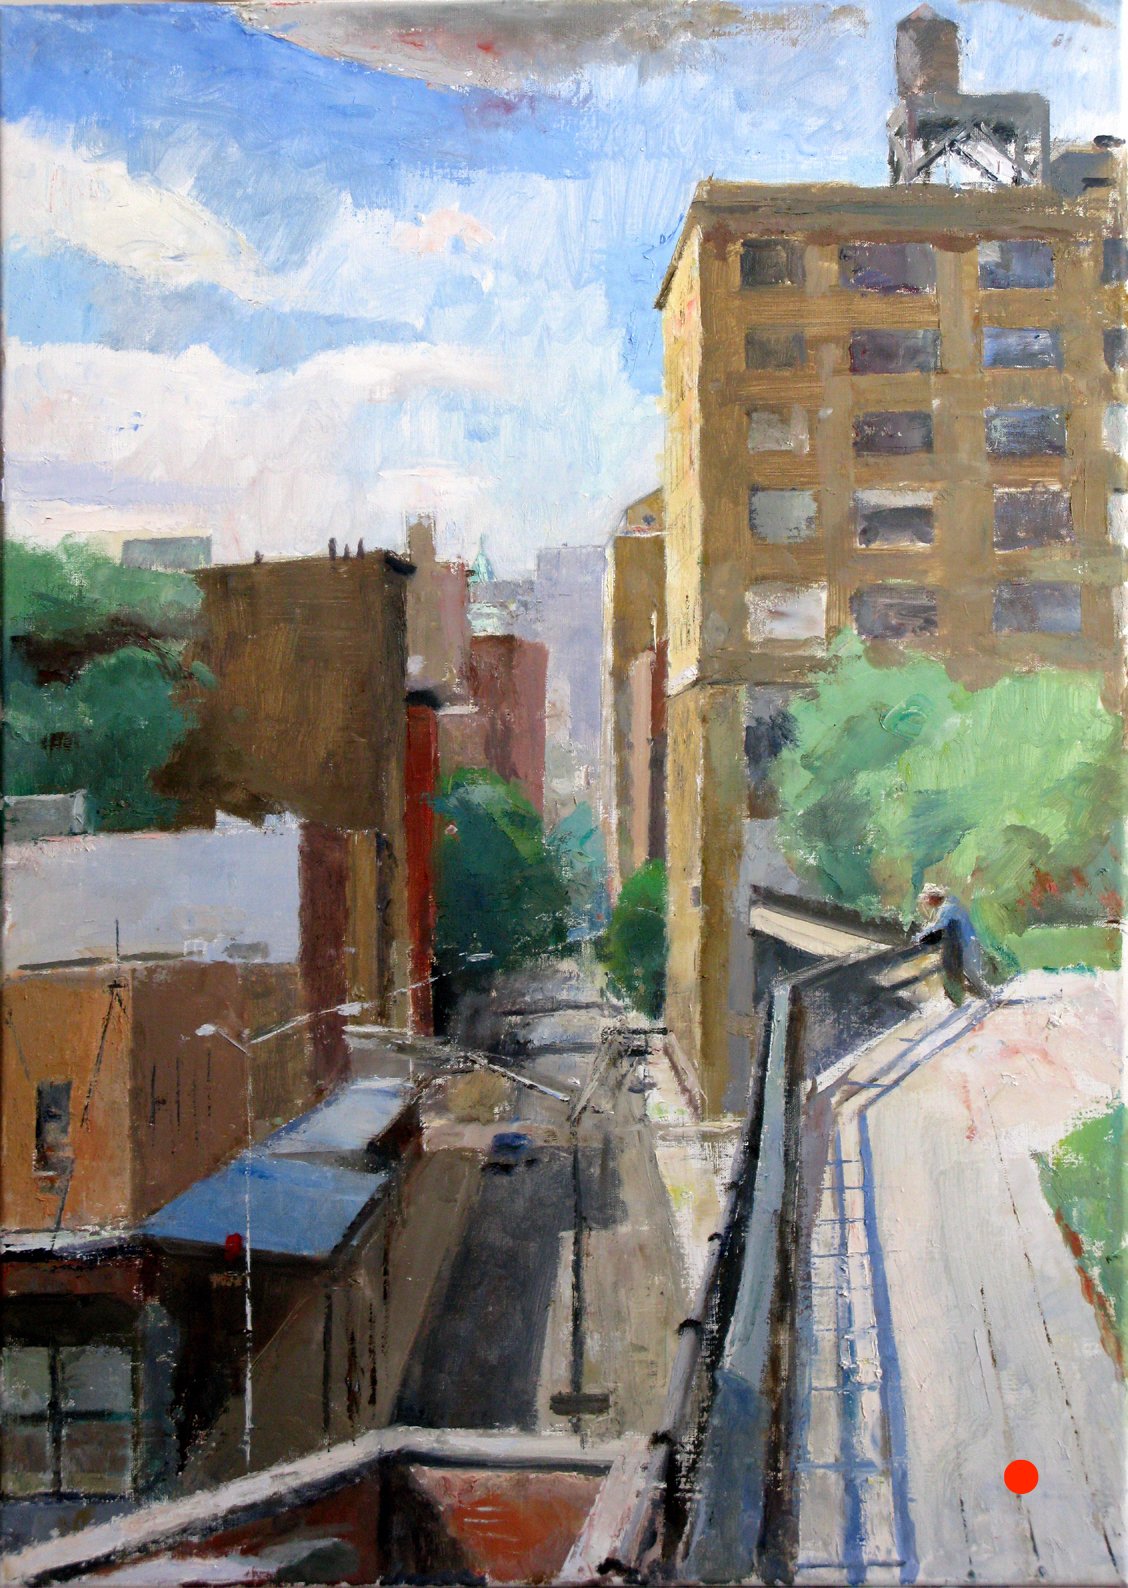 Washington Street,  South View, 27 x 19 inches, oil on linen, 2010.